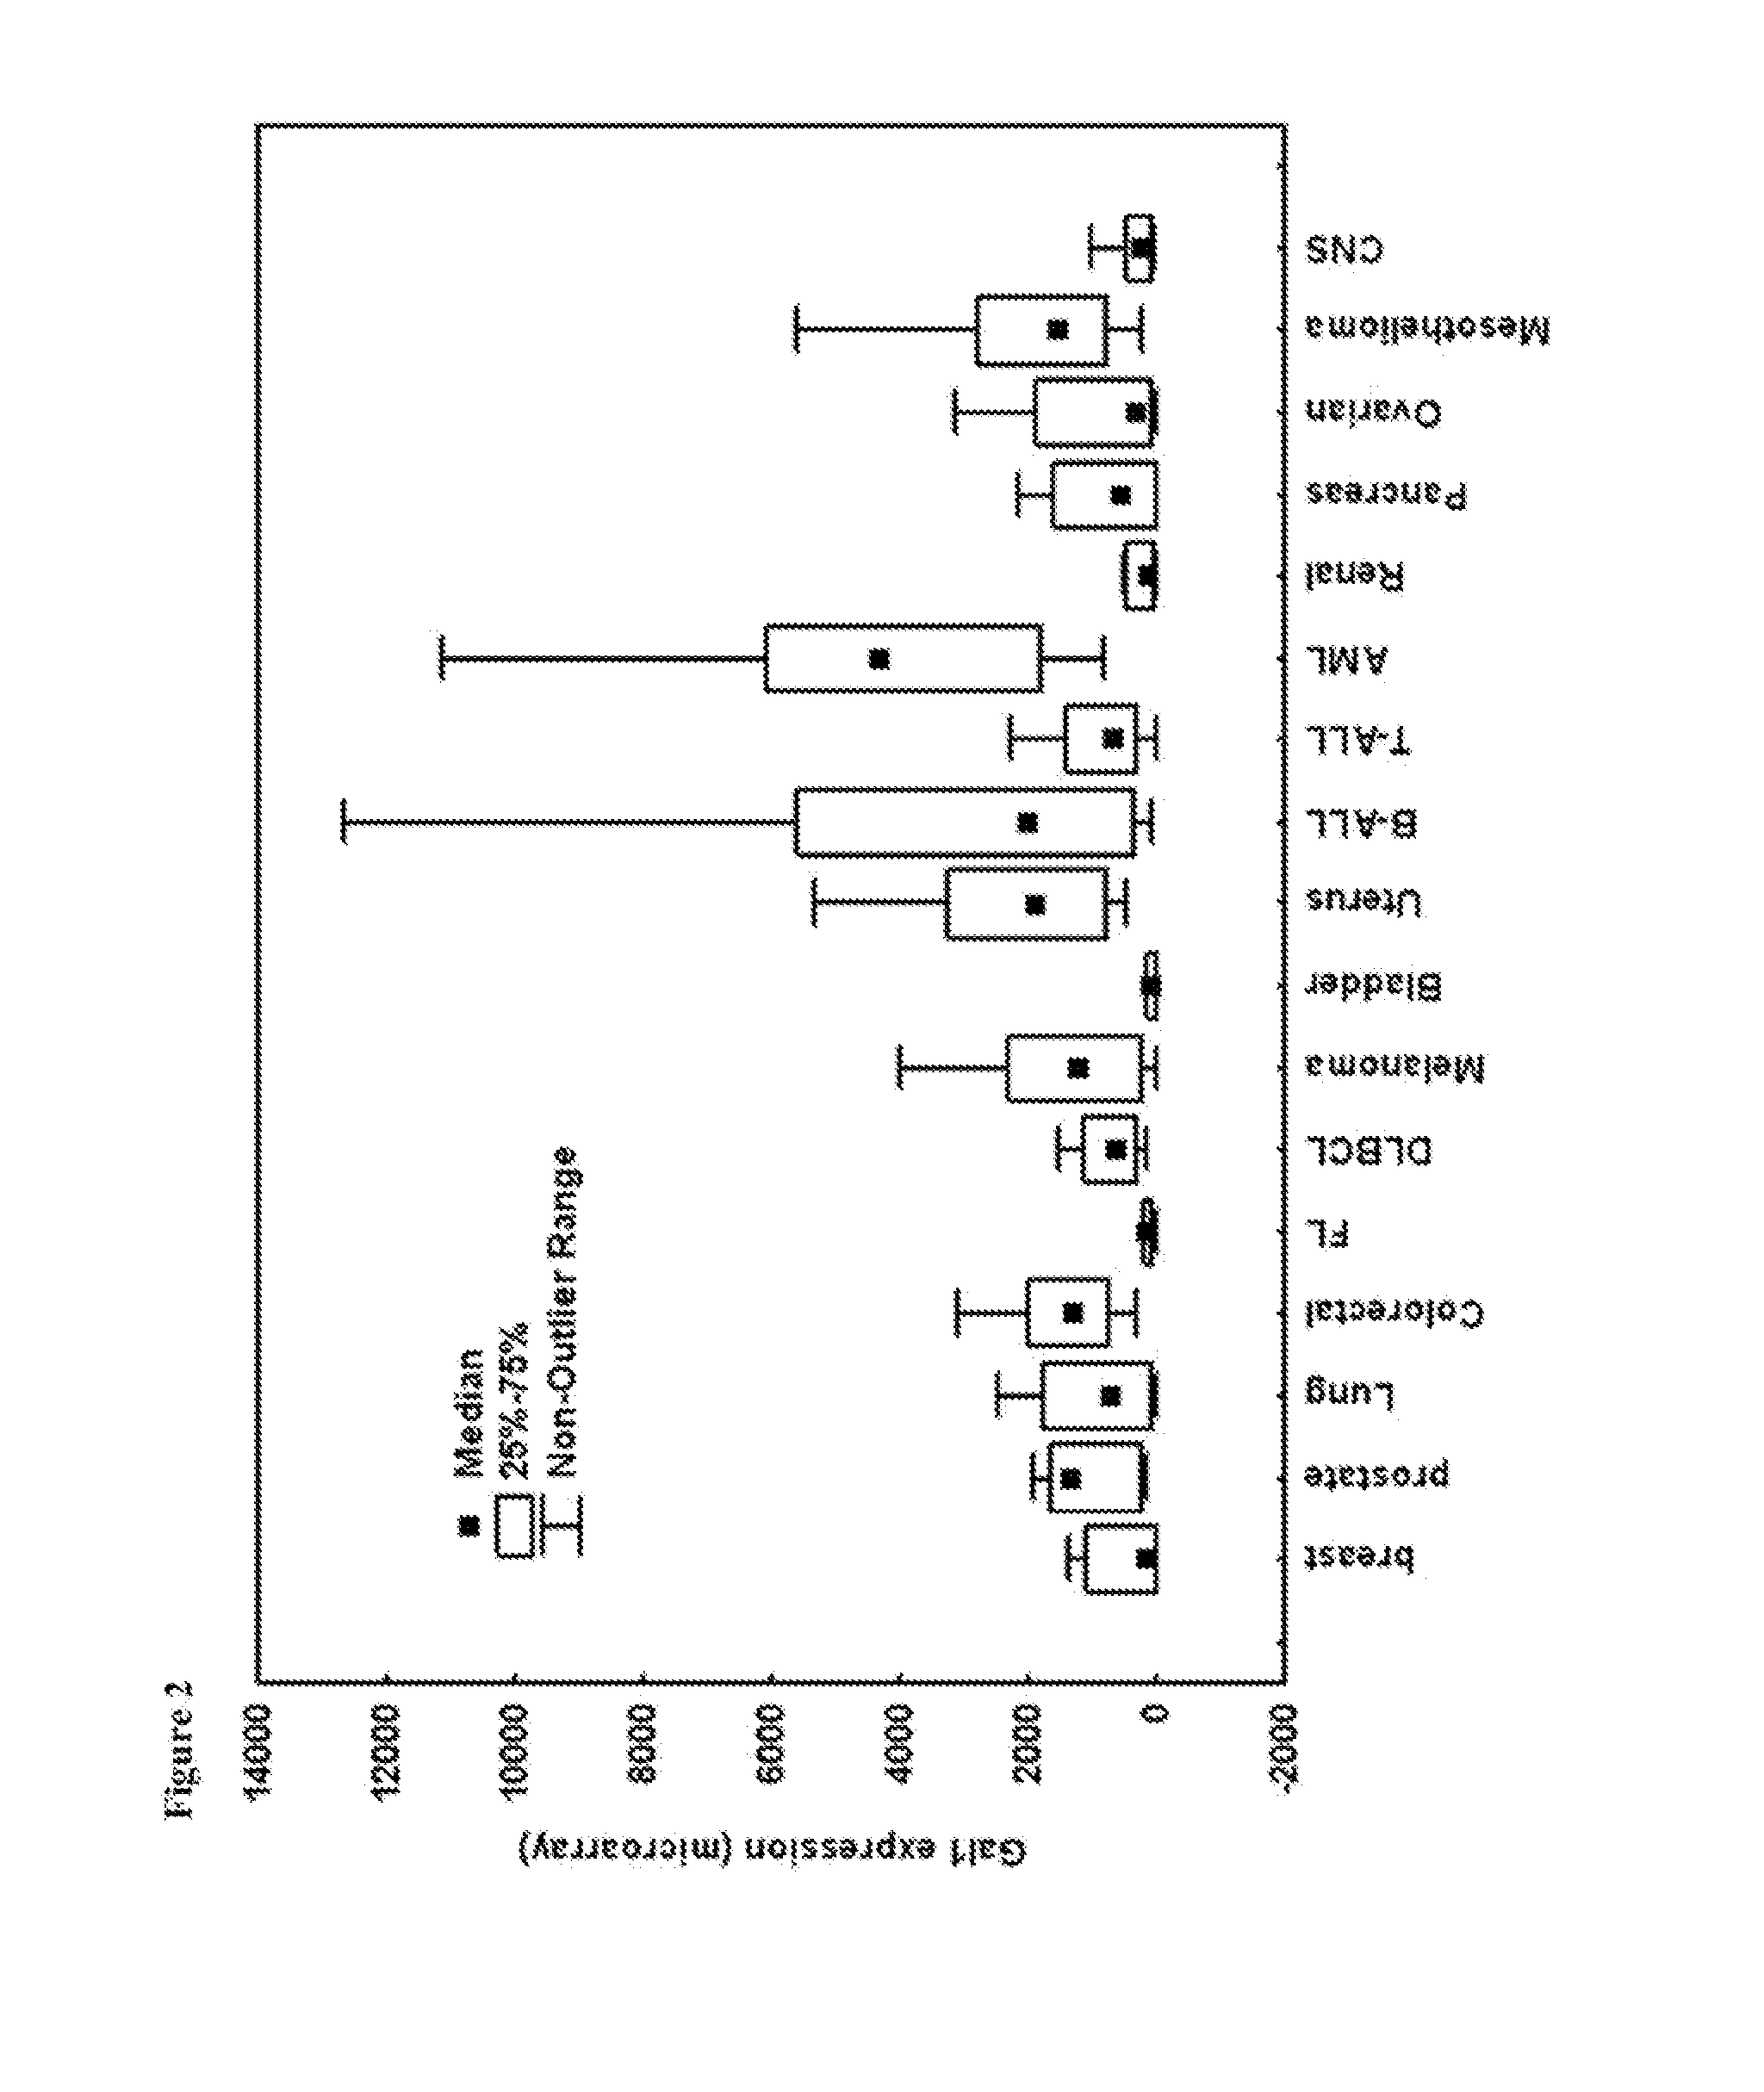 Anti-galectin-1 monoclonal antibodies and fragments thereof